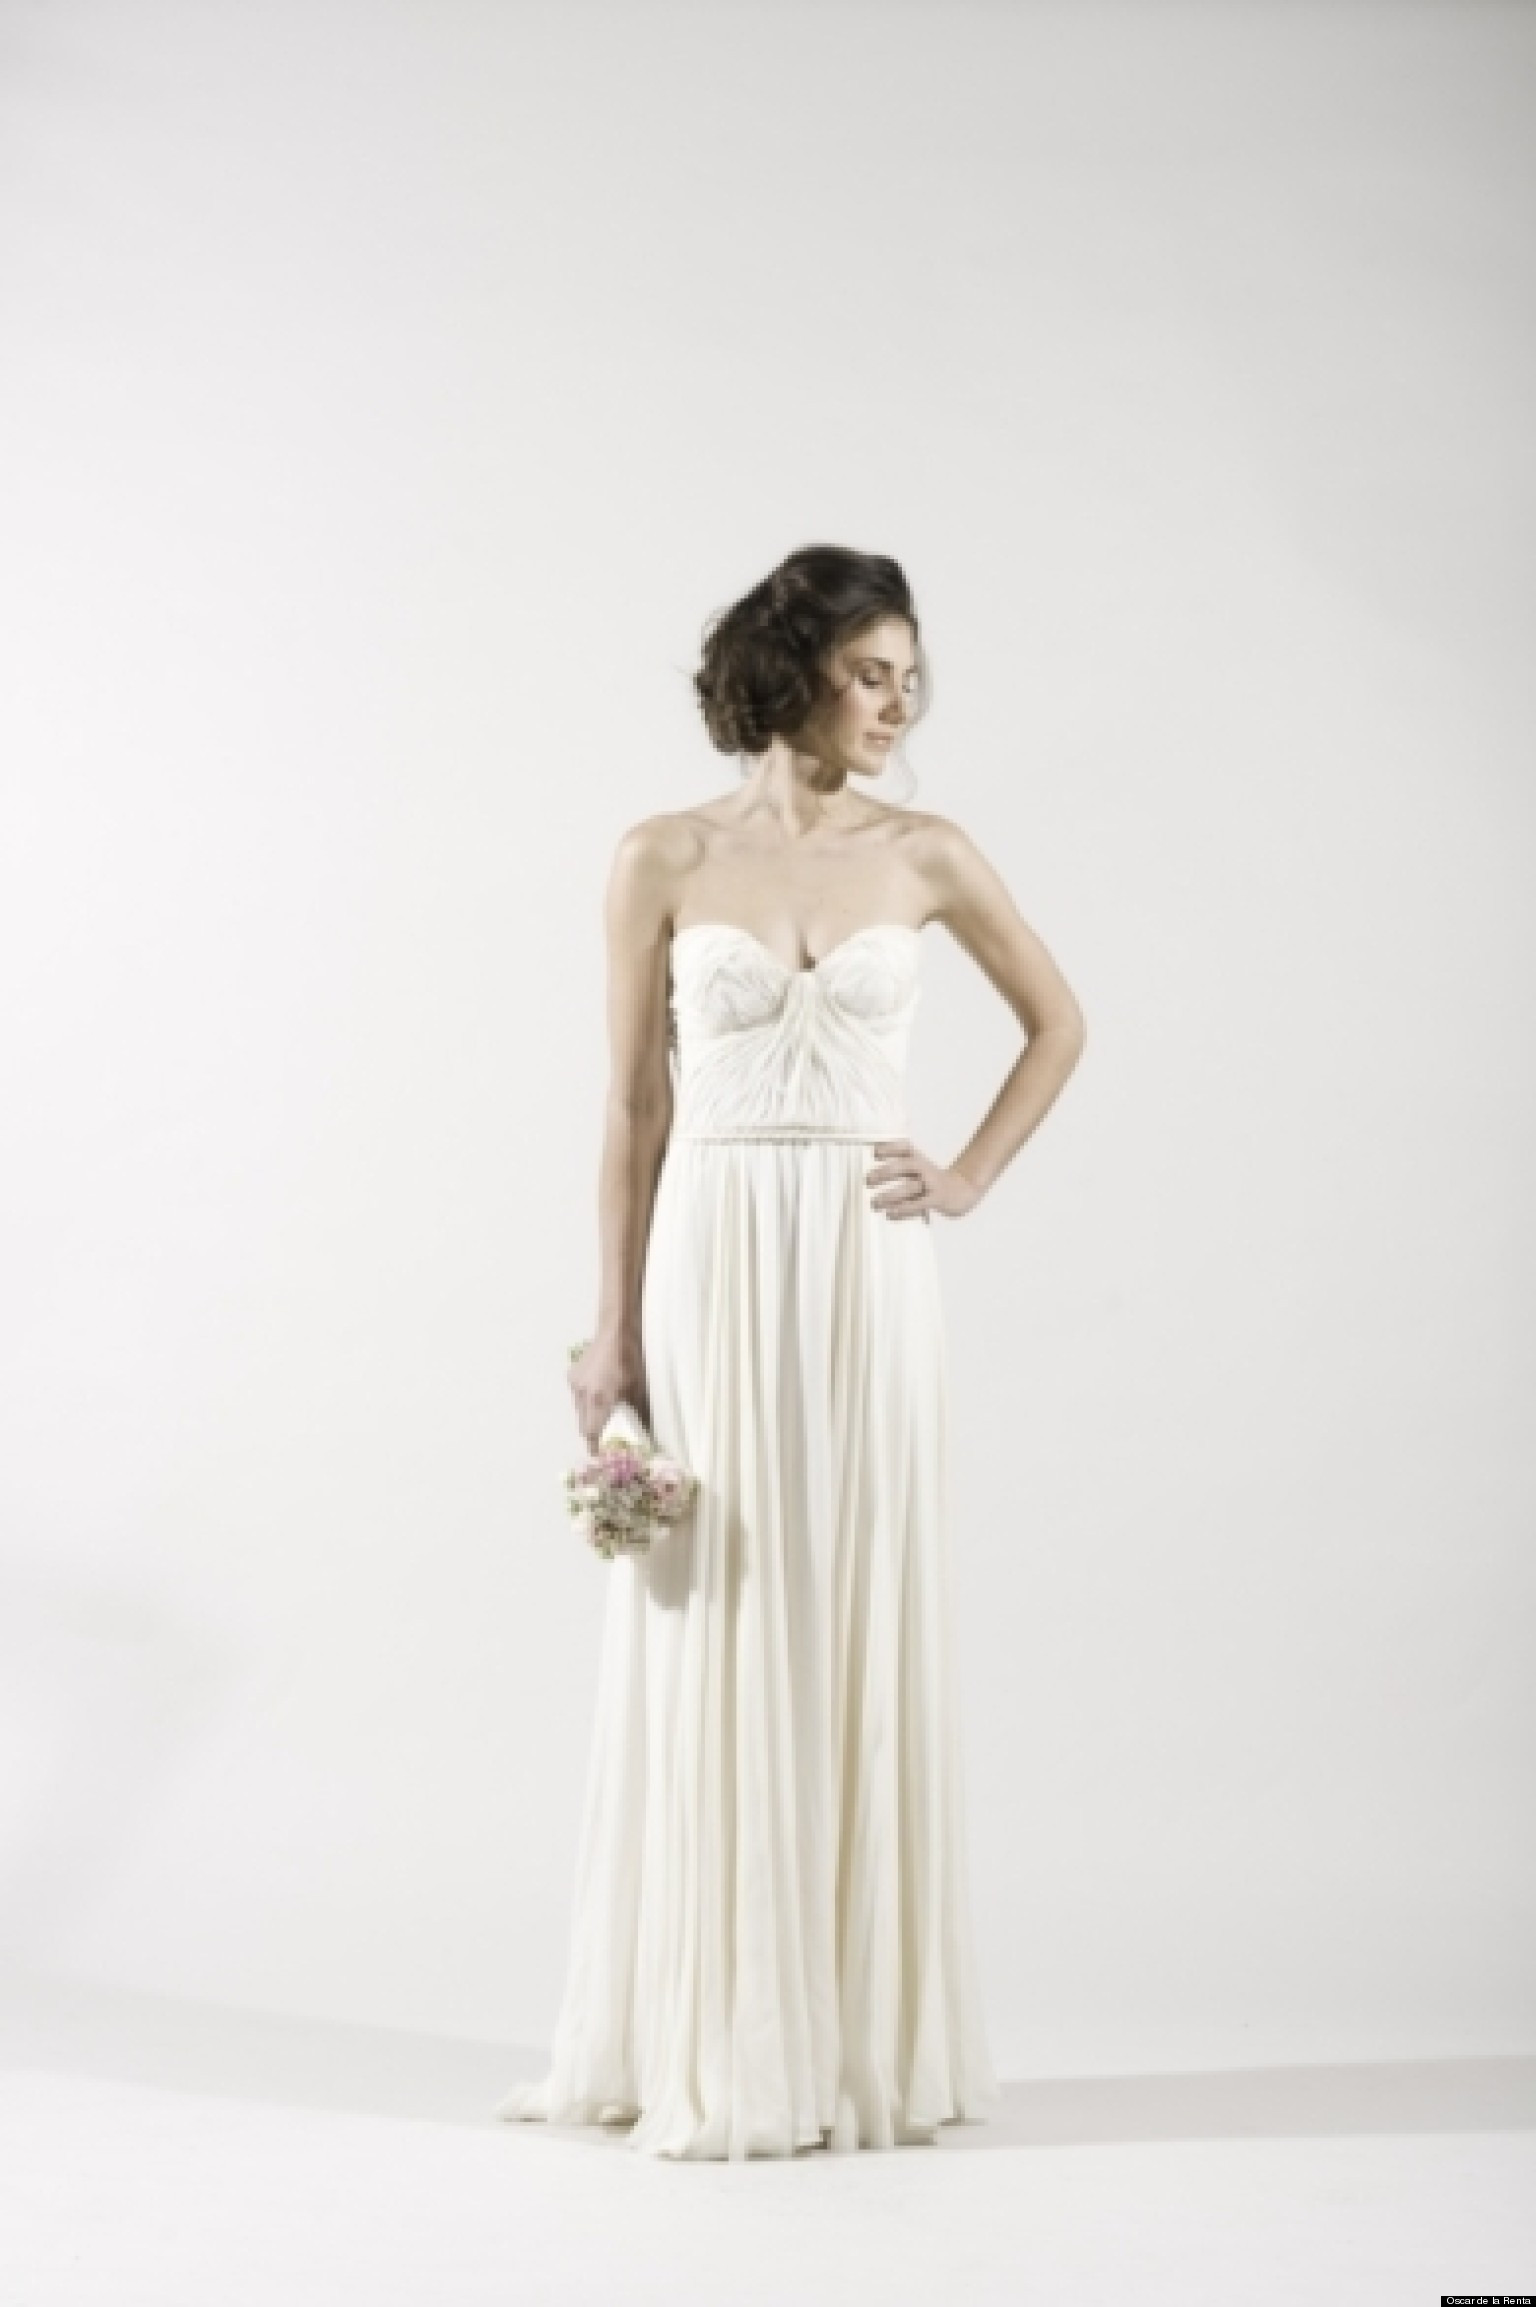 Grecian Wedding Dress
 Grecian Wedding Dresses For A Goddess Inspired Look